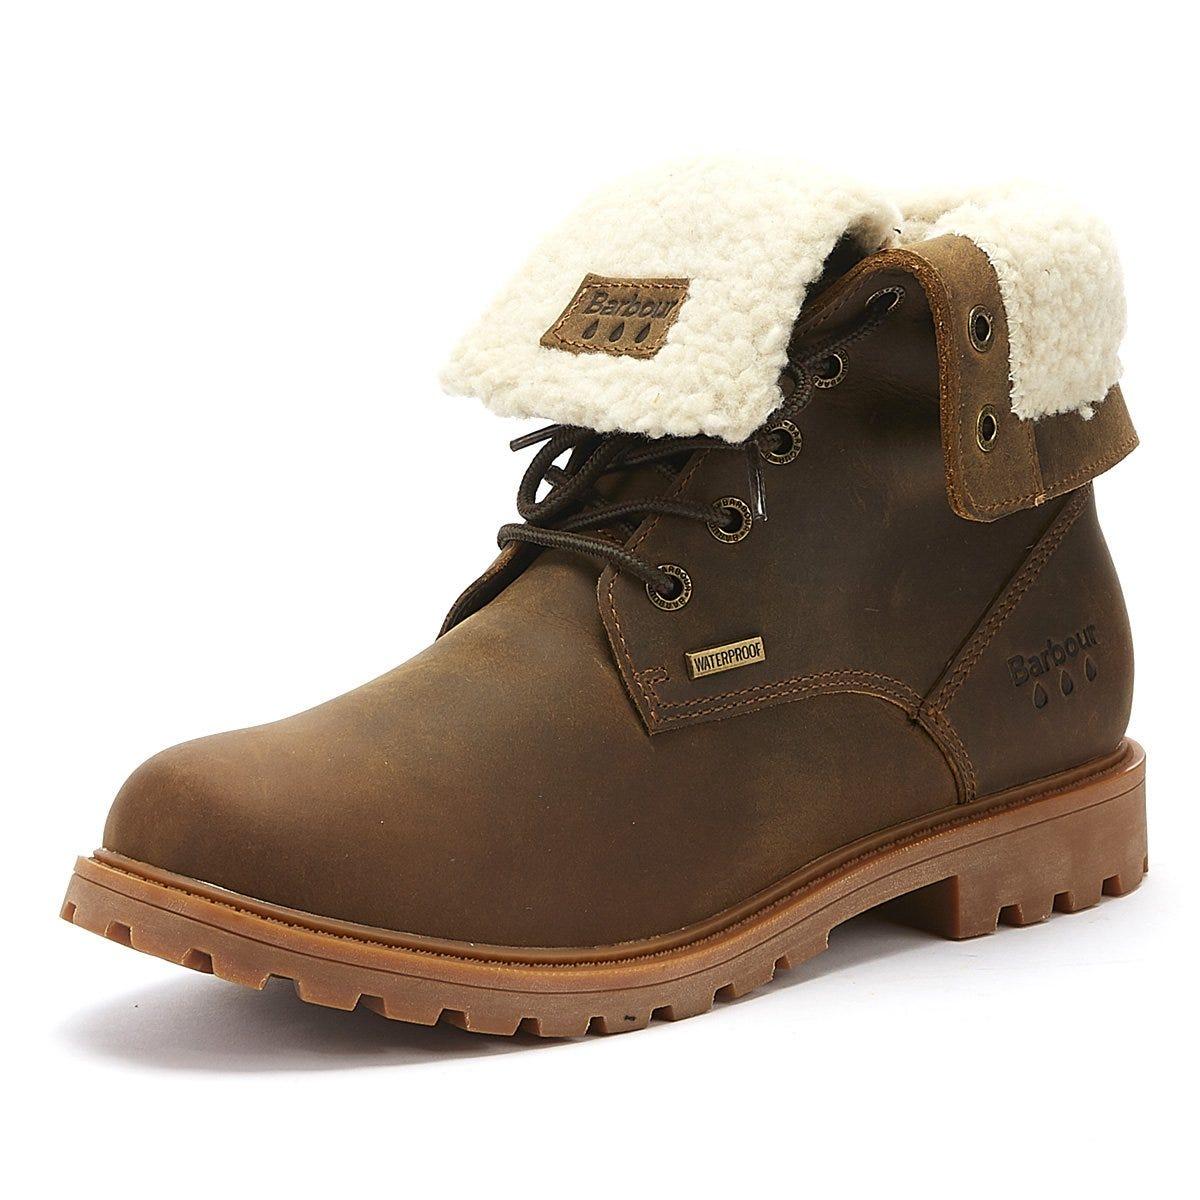 Sale > barbour hamsterley boots size 5 > in stock